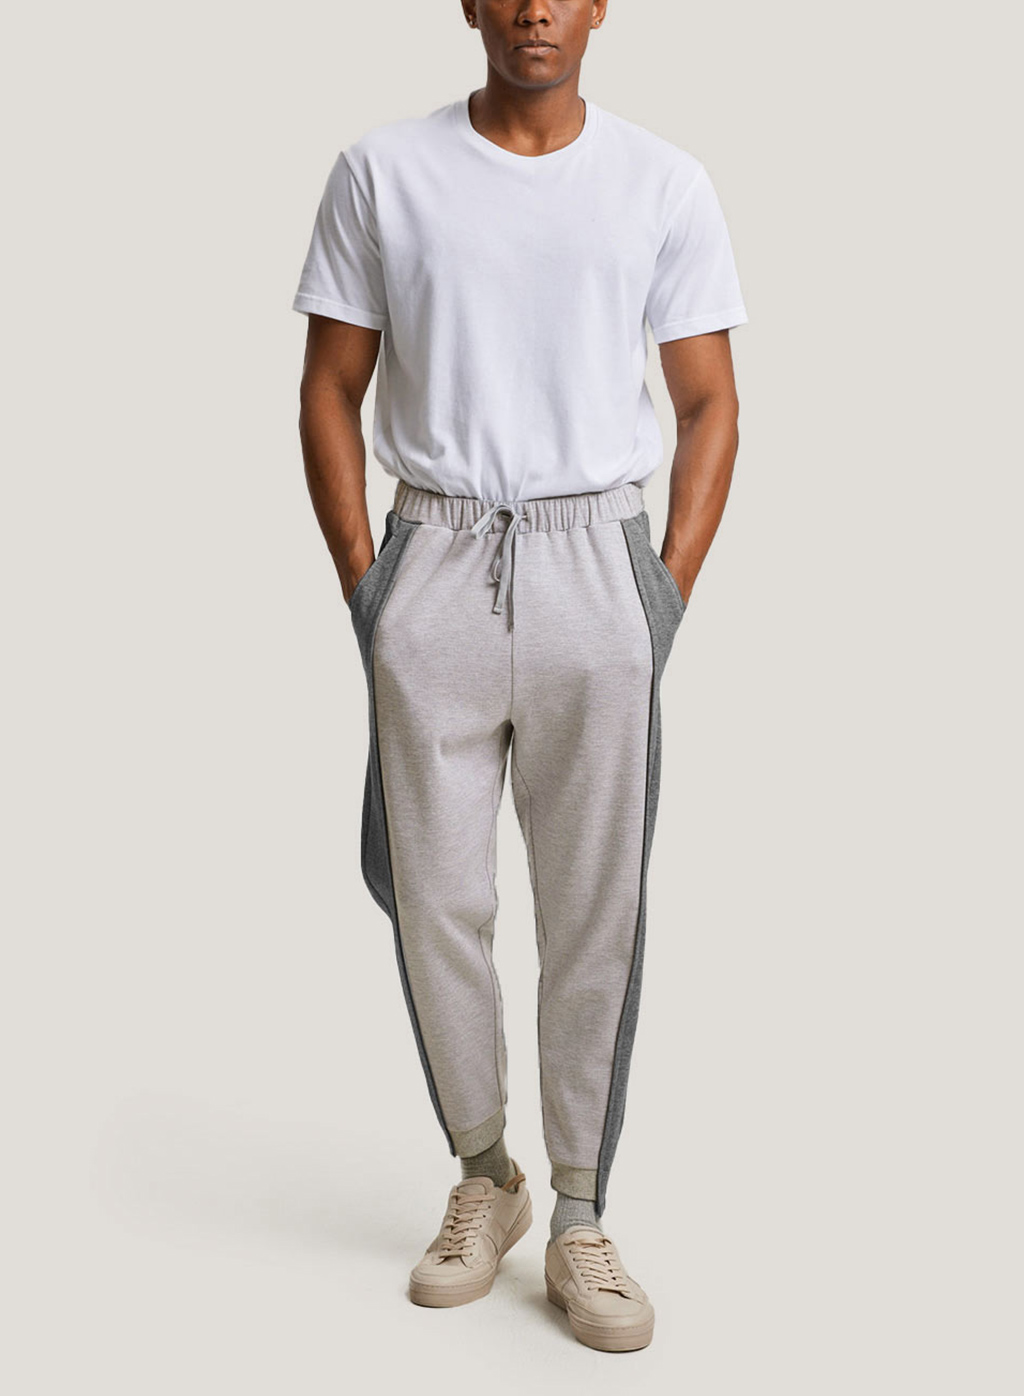 Shop Men's Luxury Clothing: 15% Off All Items - Nap Loungewear